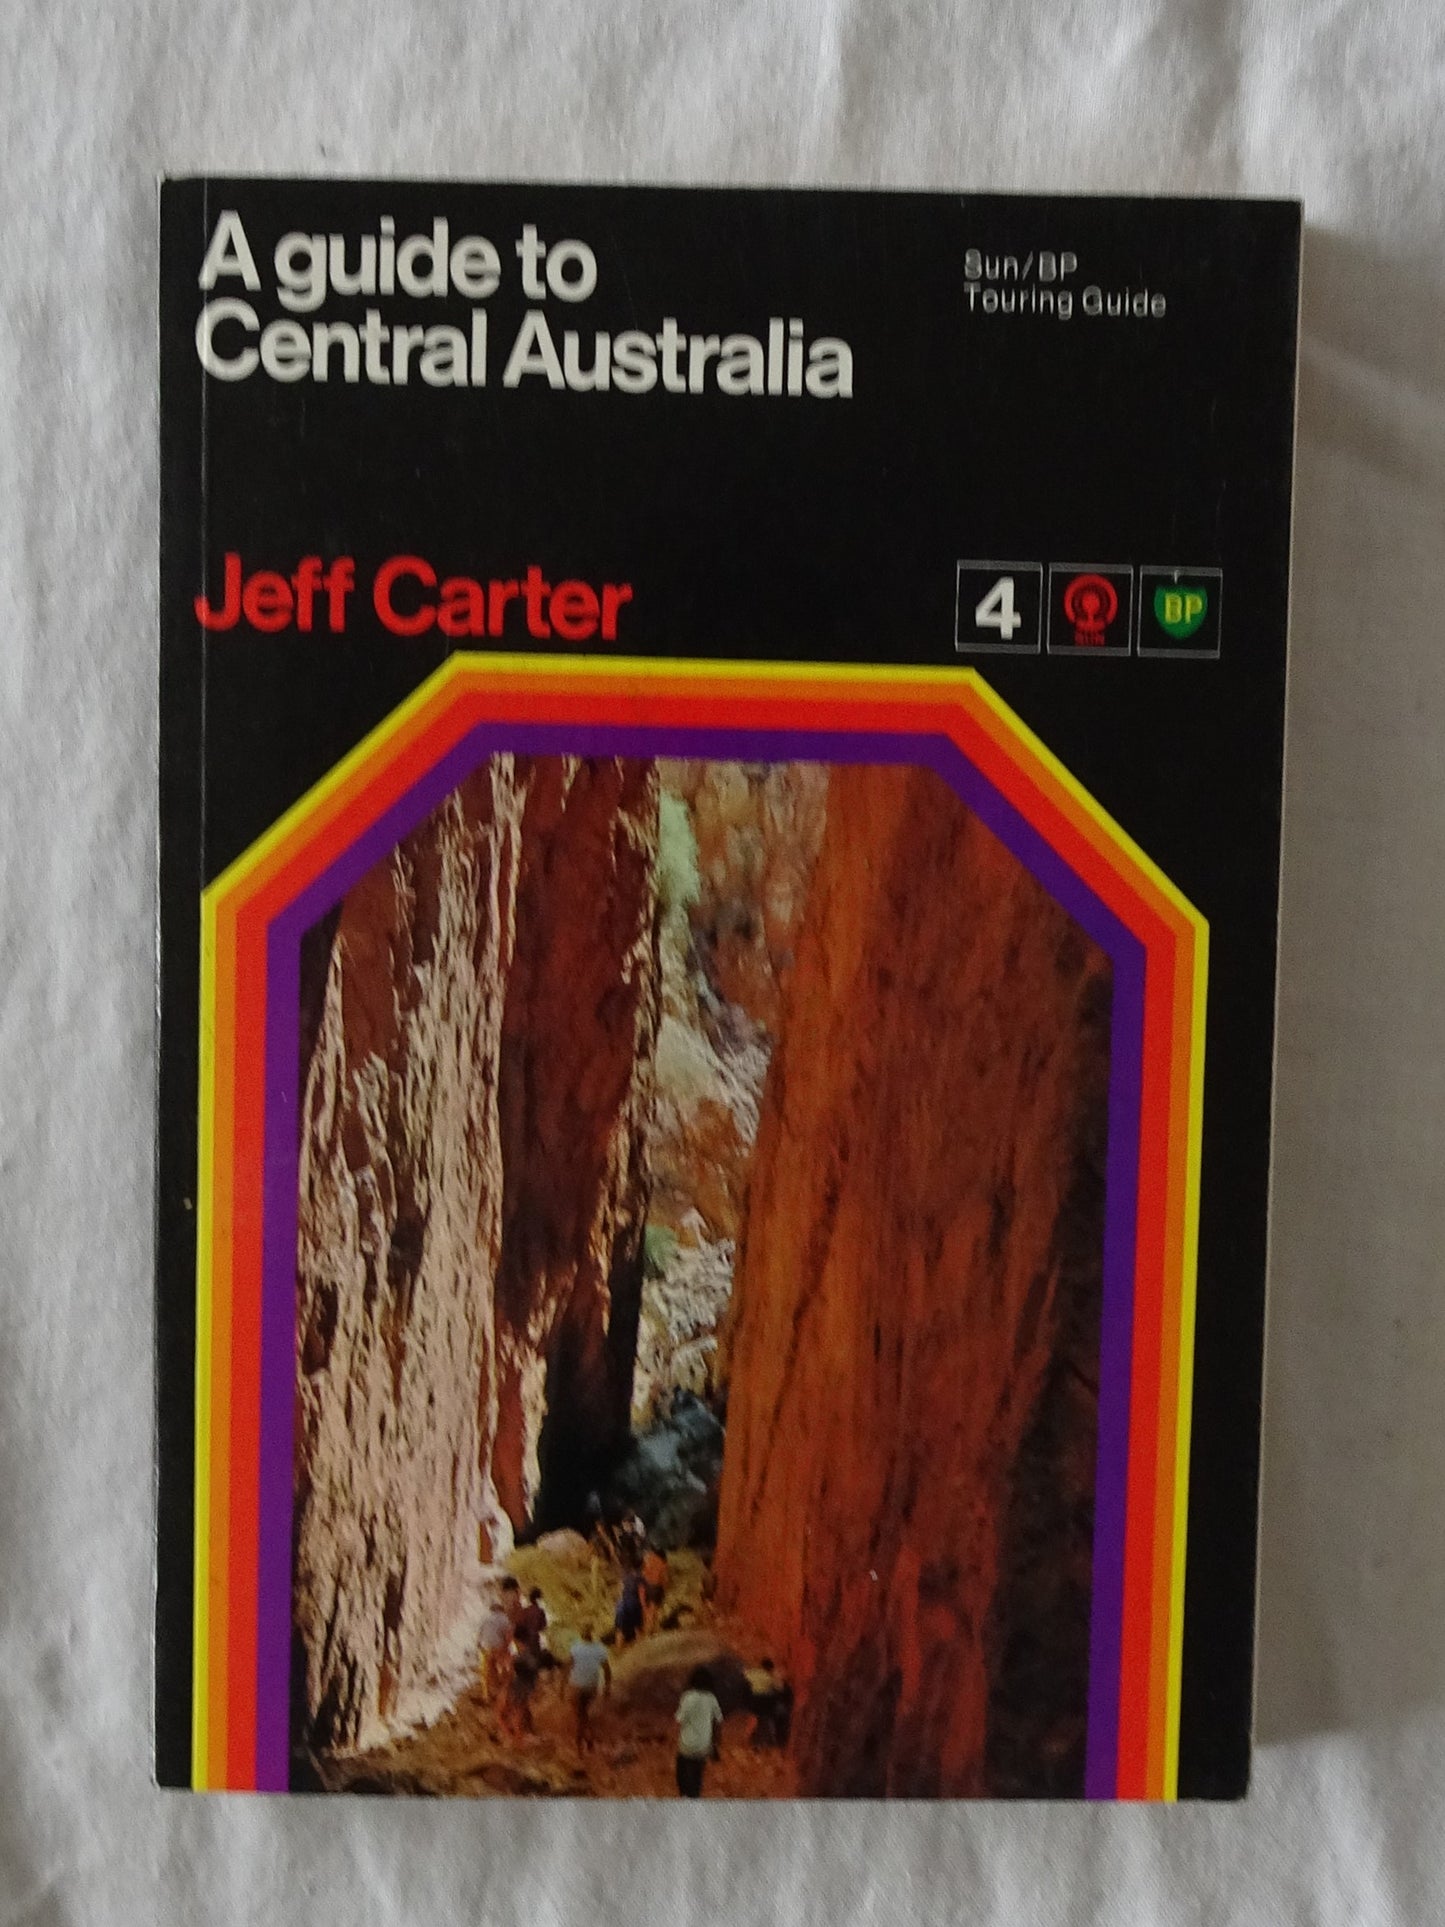 A Guide to Central Australia  4 SUN/BP Touring Guide  by Jeff Carter